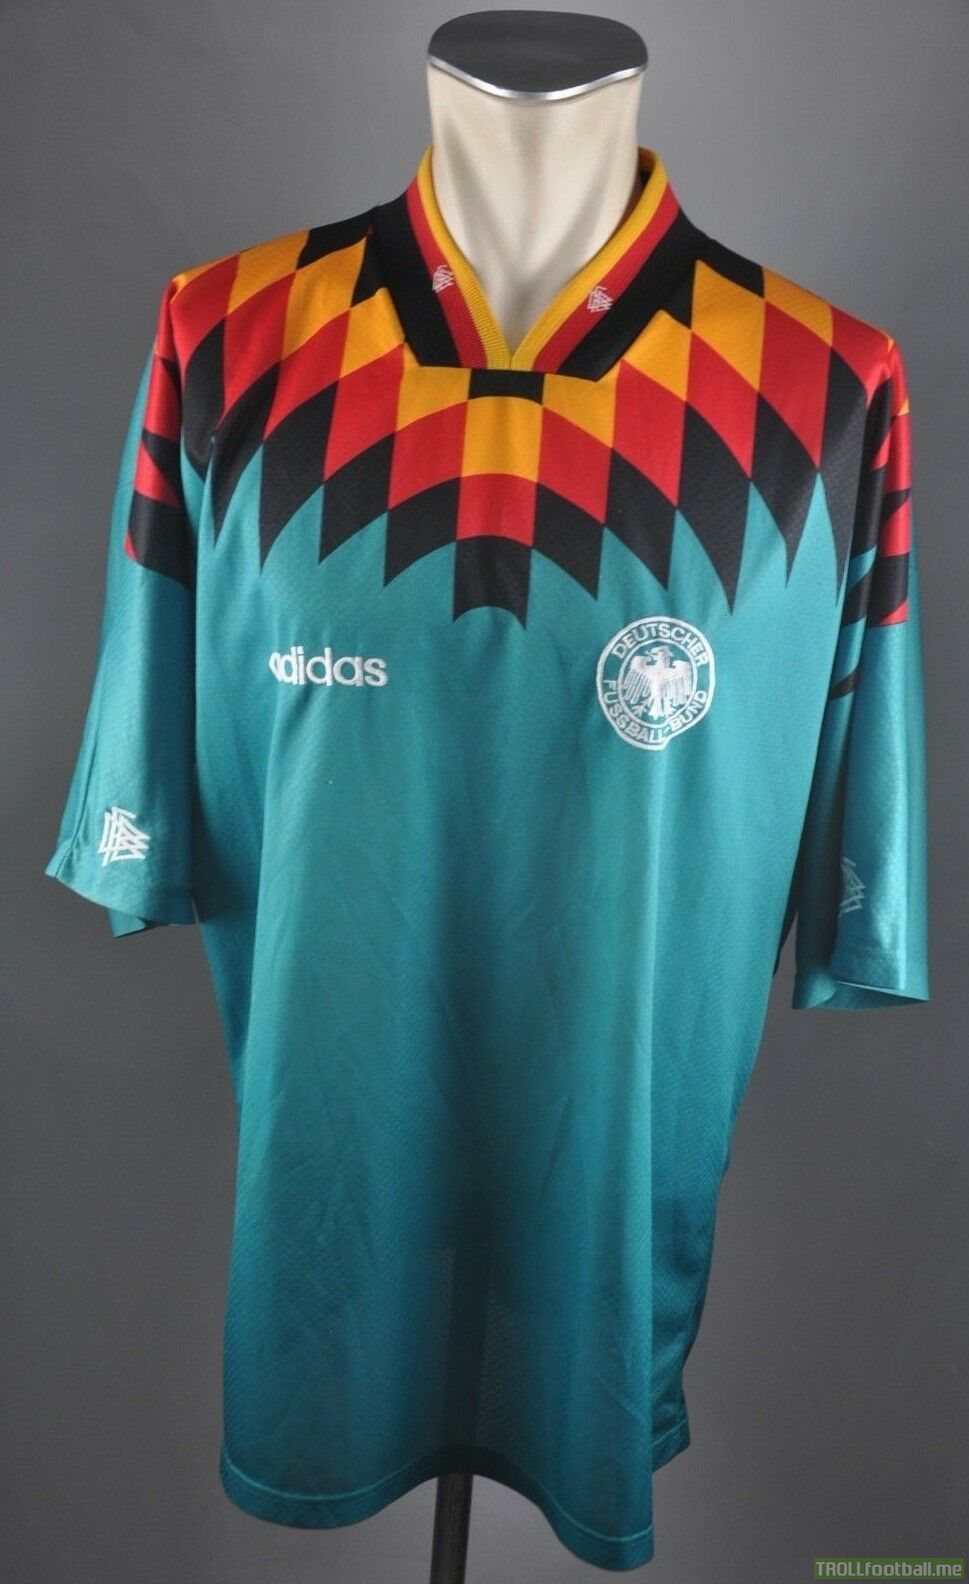 These are Germany's away kits from 94. But did Germany ever play in them? I can't seem to find any images of them actually wearing them.